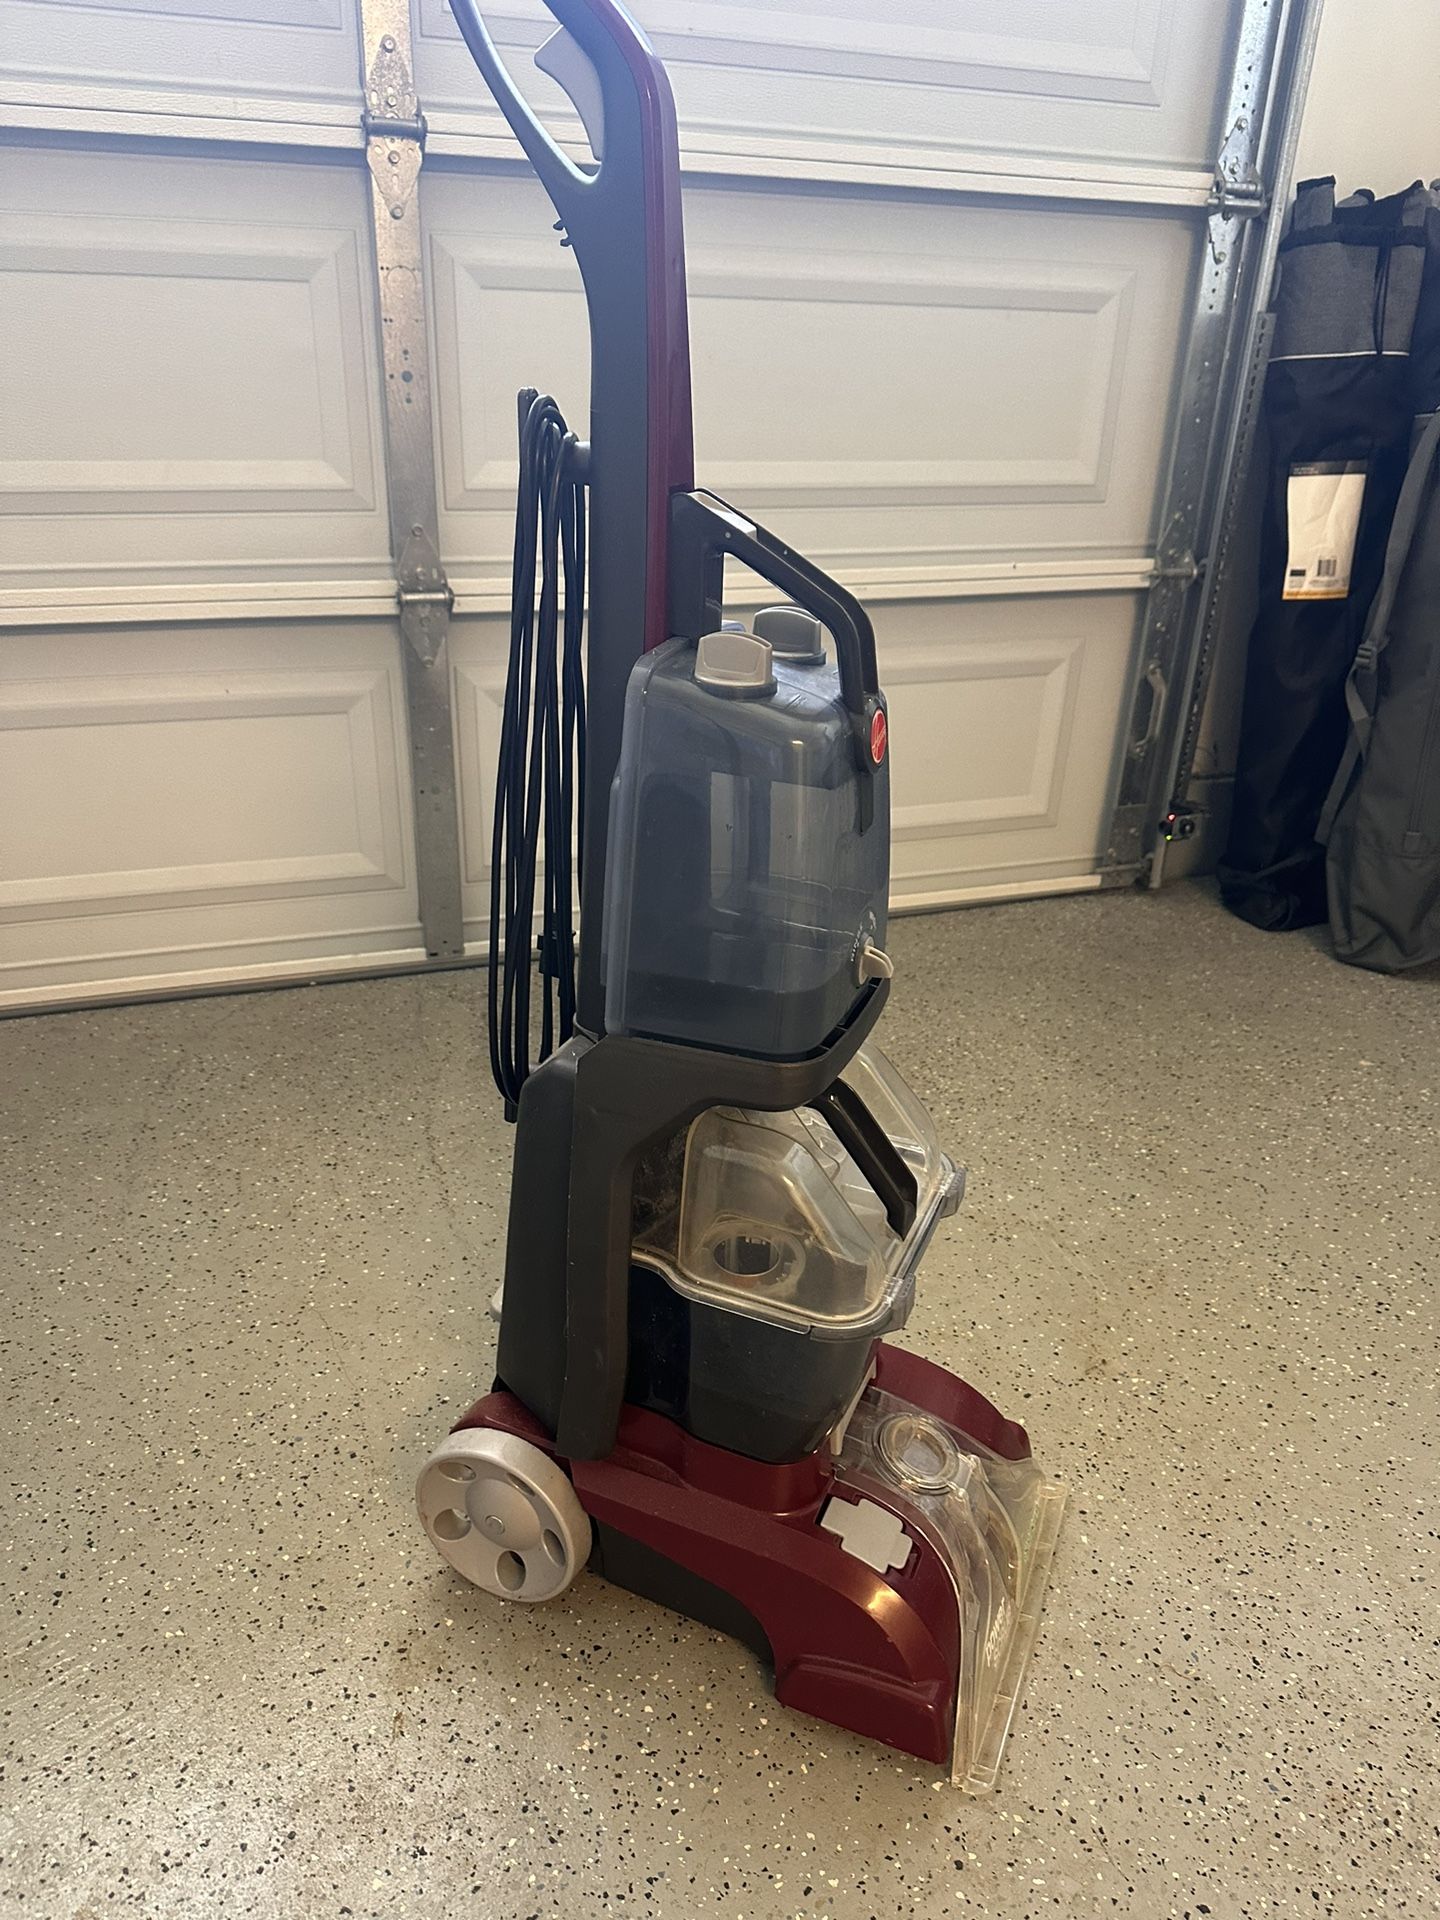 Hoover Carpet Cleaner With Shampoo Vacuum